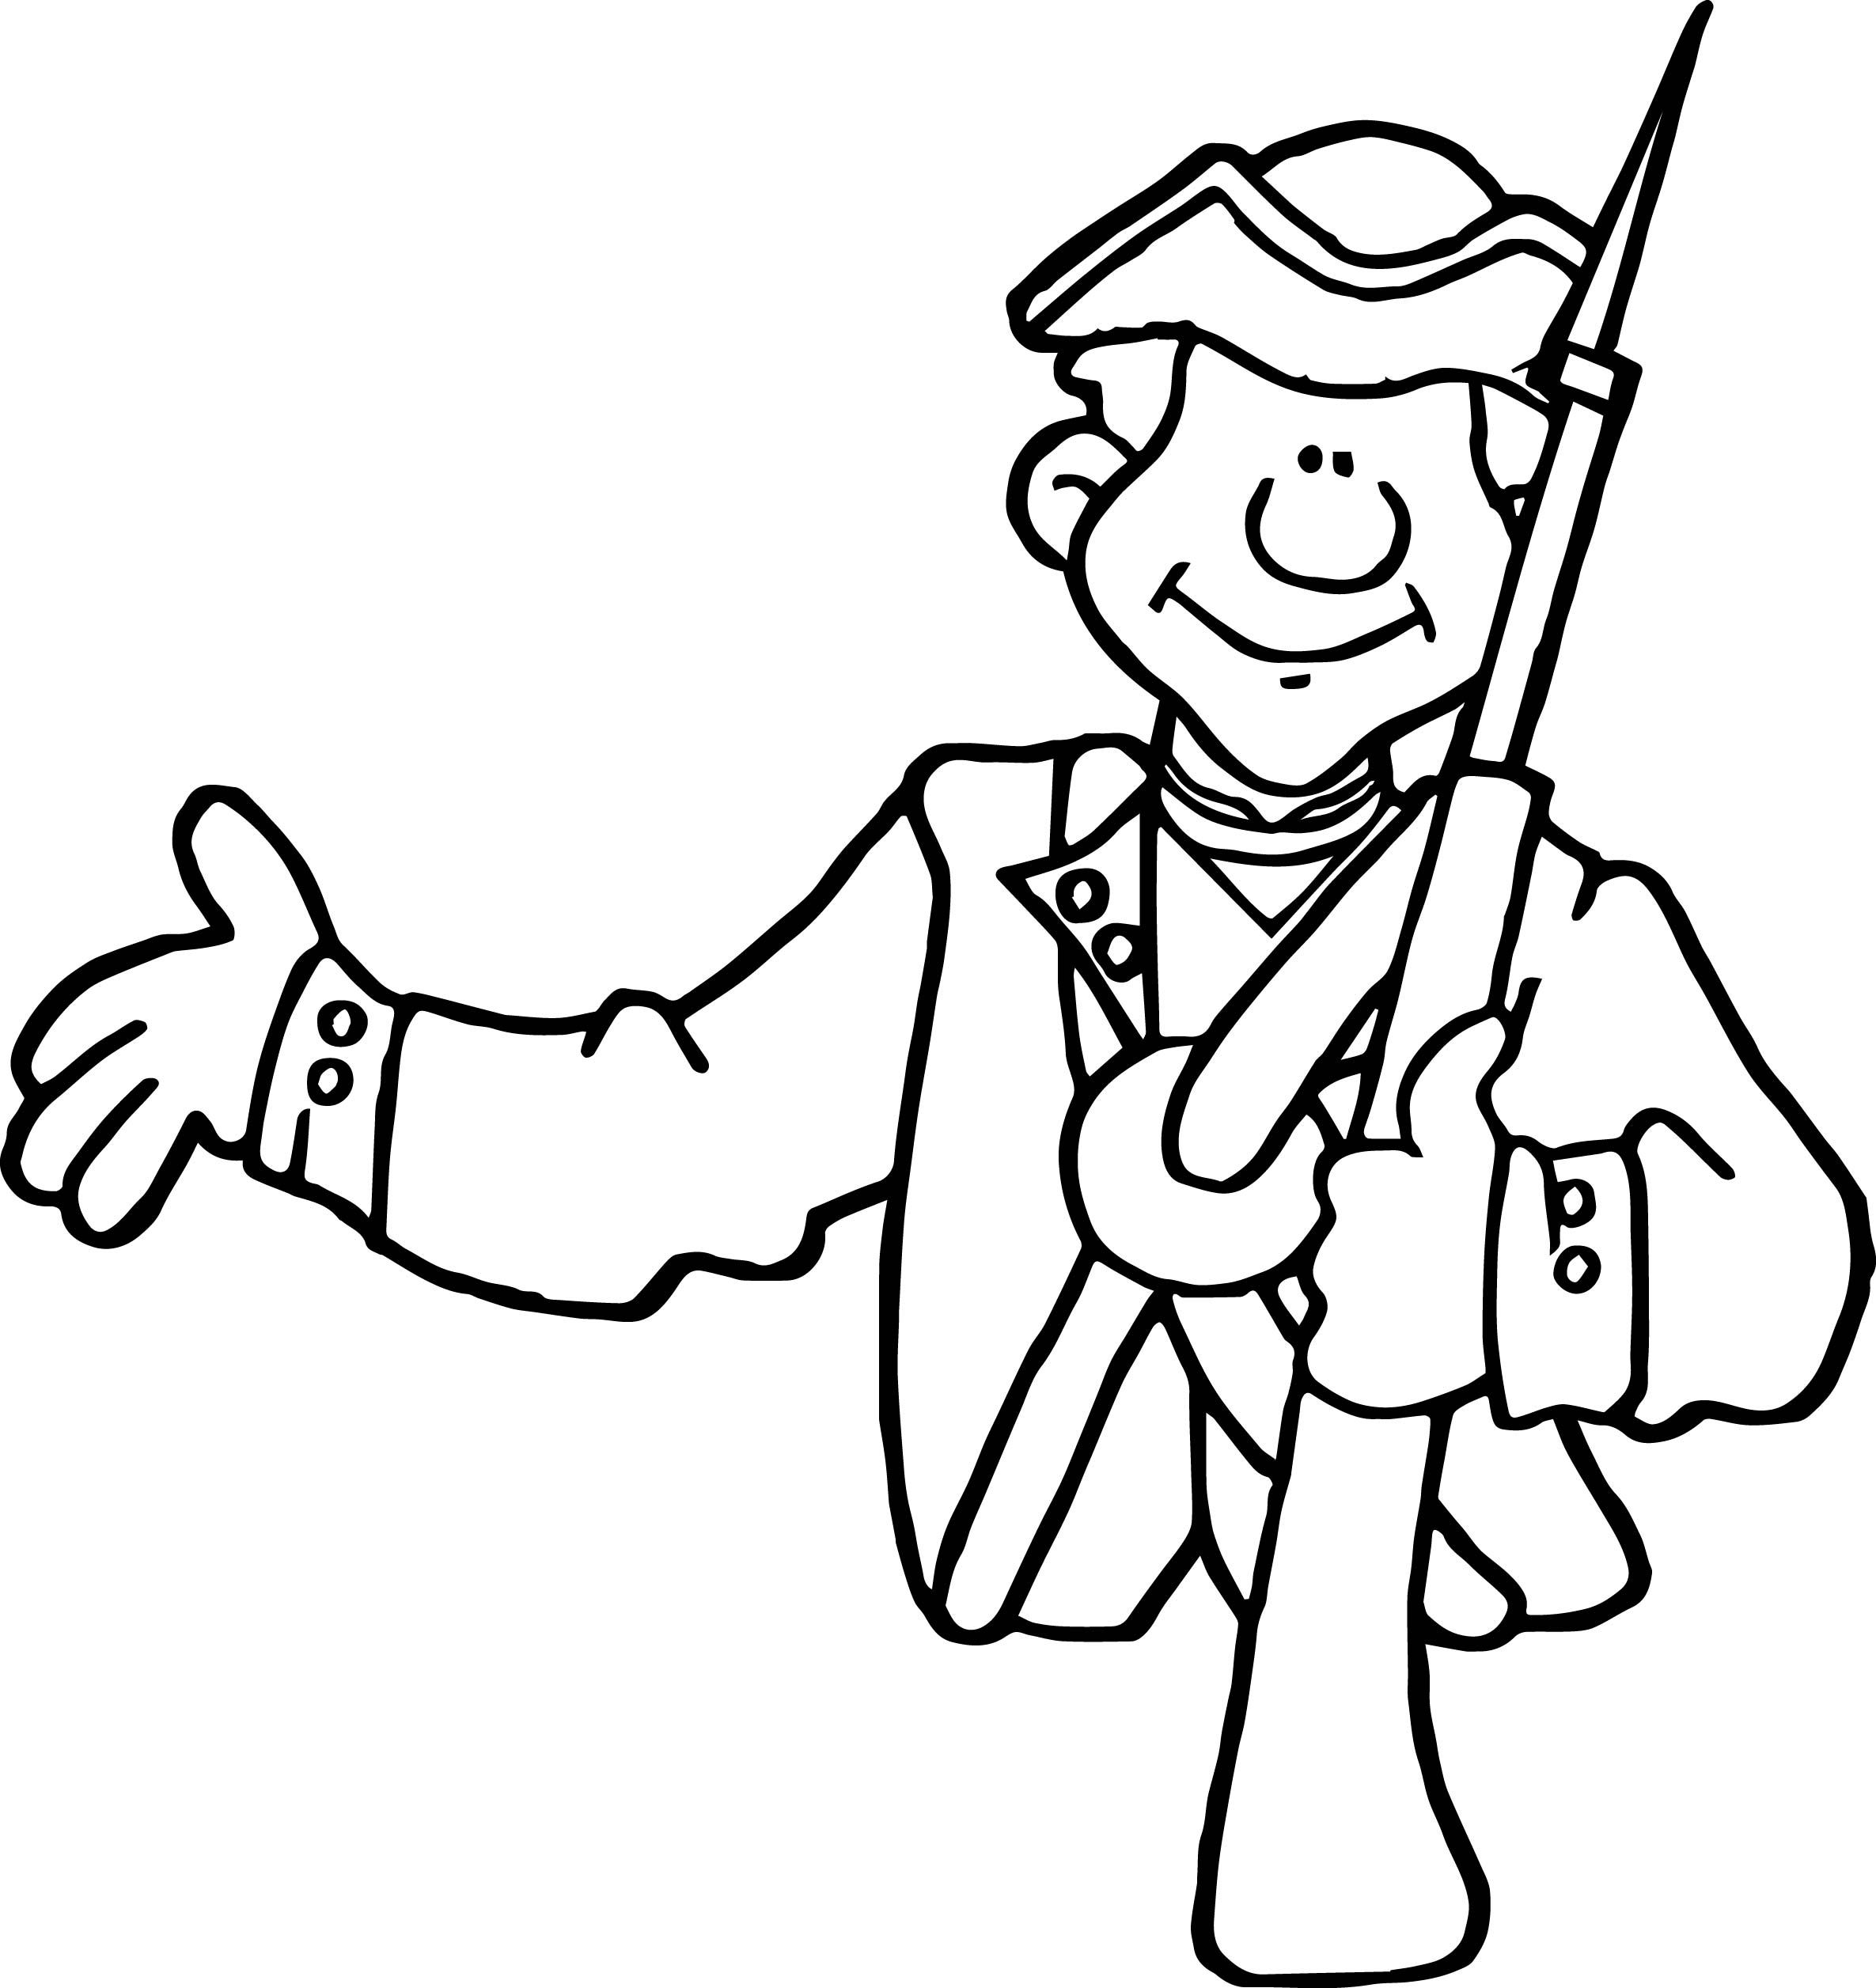 Coloring pages cool revolution am his french indian soldier